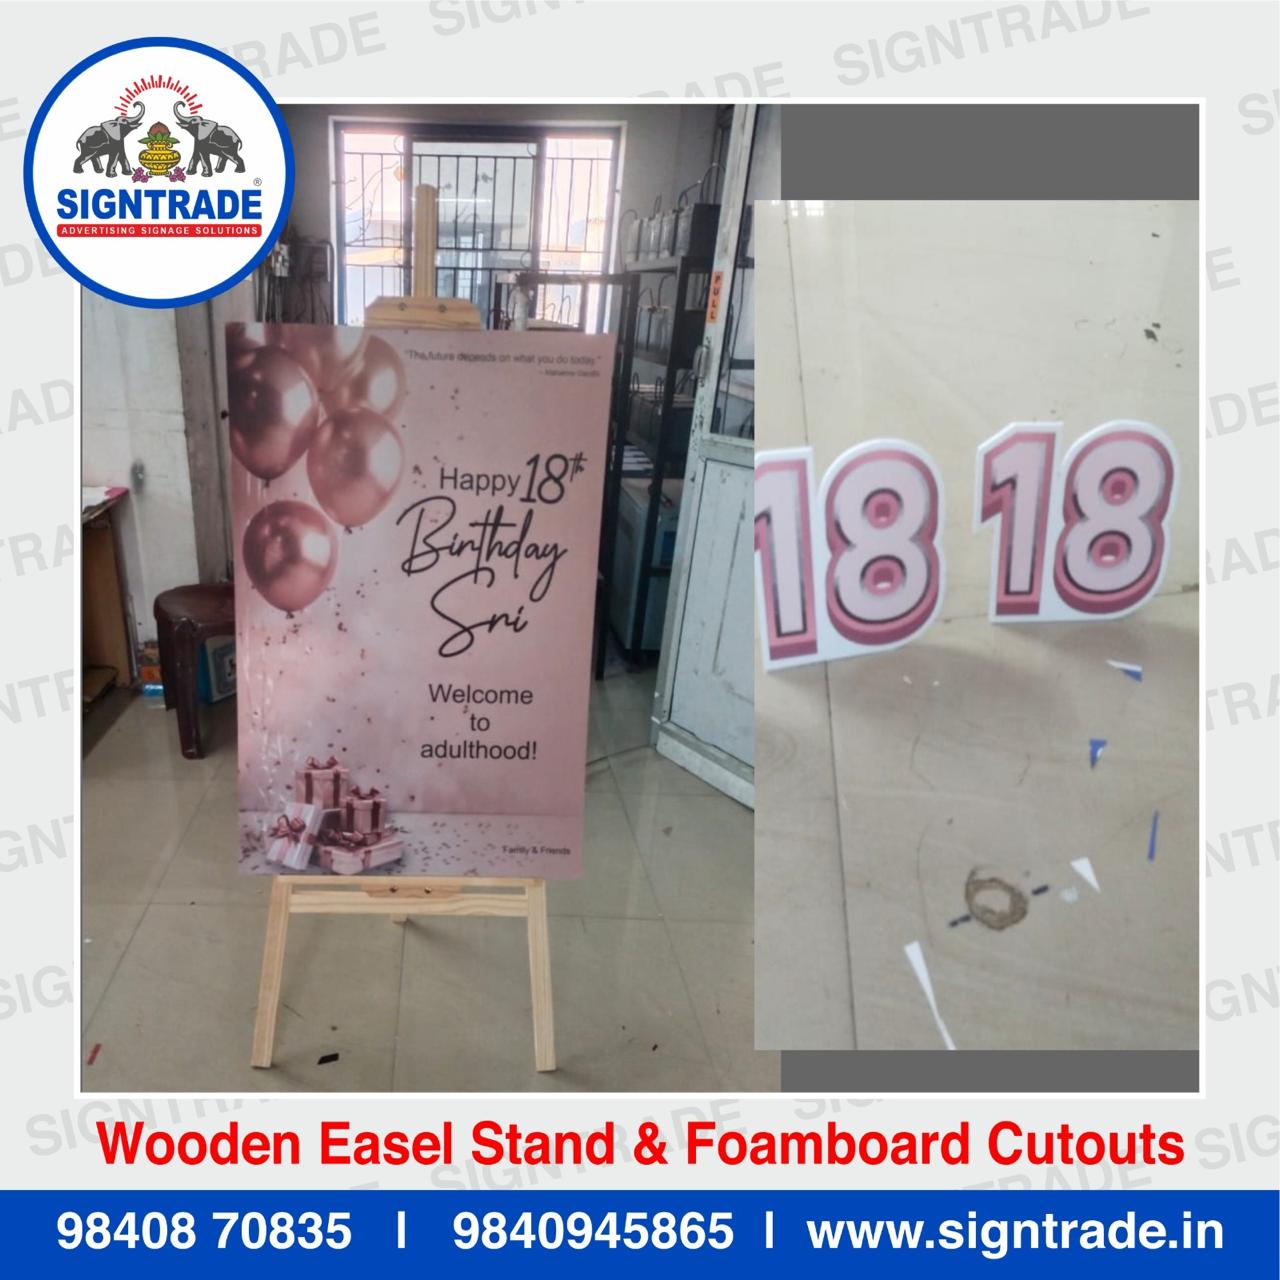 Wooden Easel Stand in Chennai